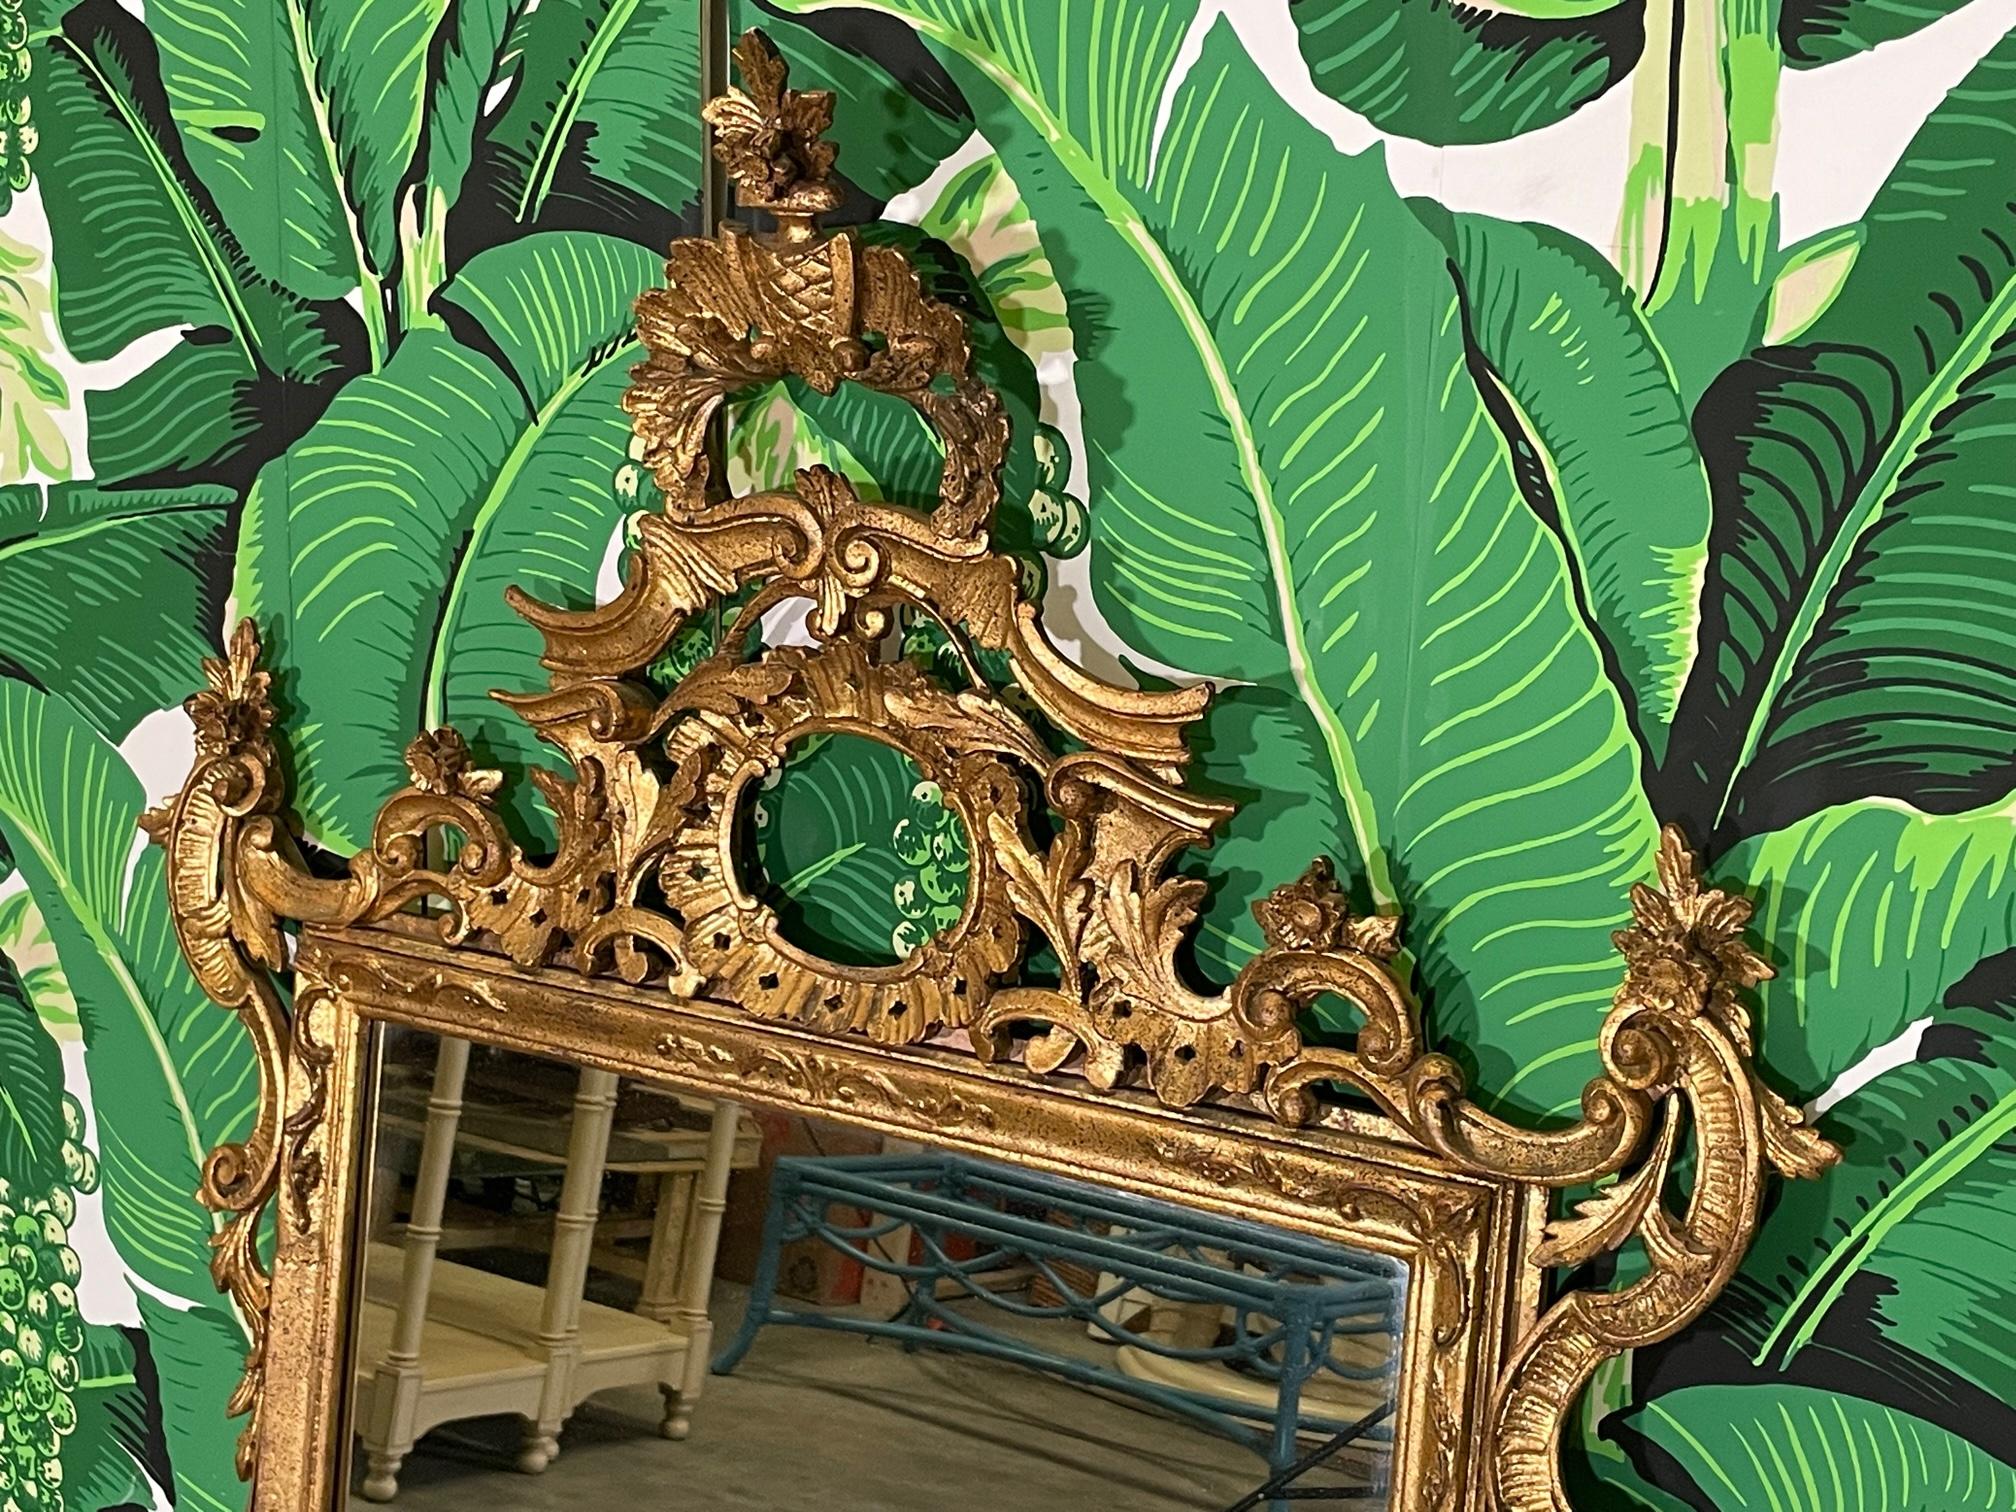 Large Rococo style wall mirror features original gold gilding and an open carved frame with flowers and scrolling acanthus leaves. Marked with Italy tag. Good condition with imperfections consistent with age. May exhibit scuffs, marks, or wear, see